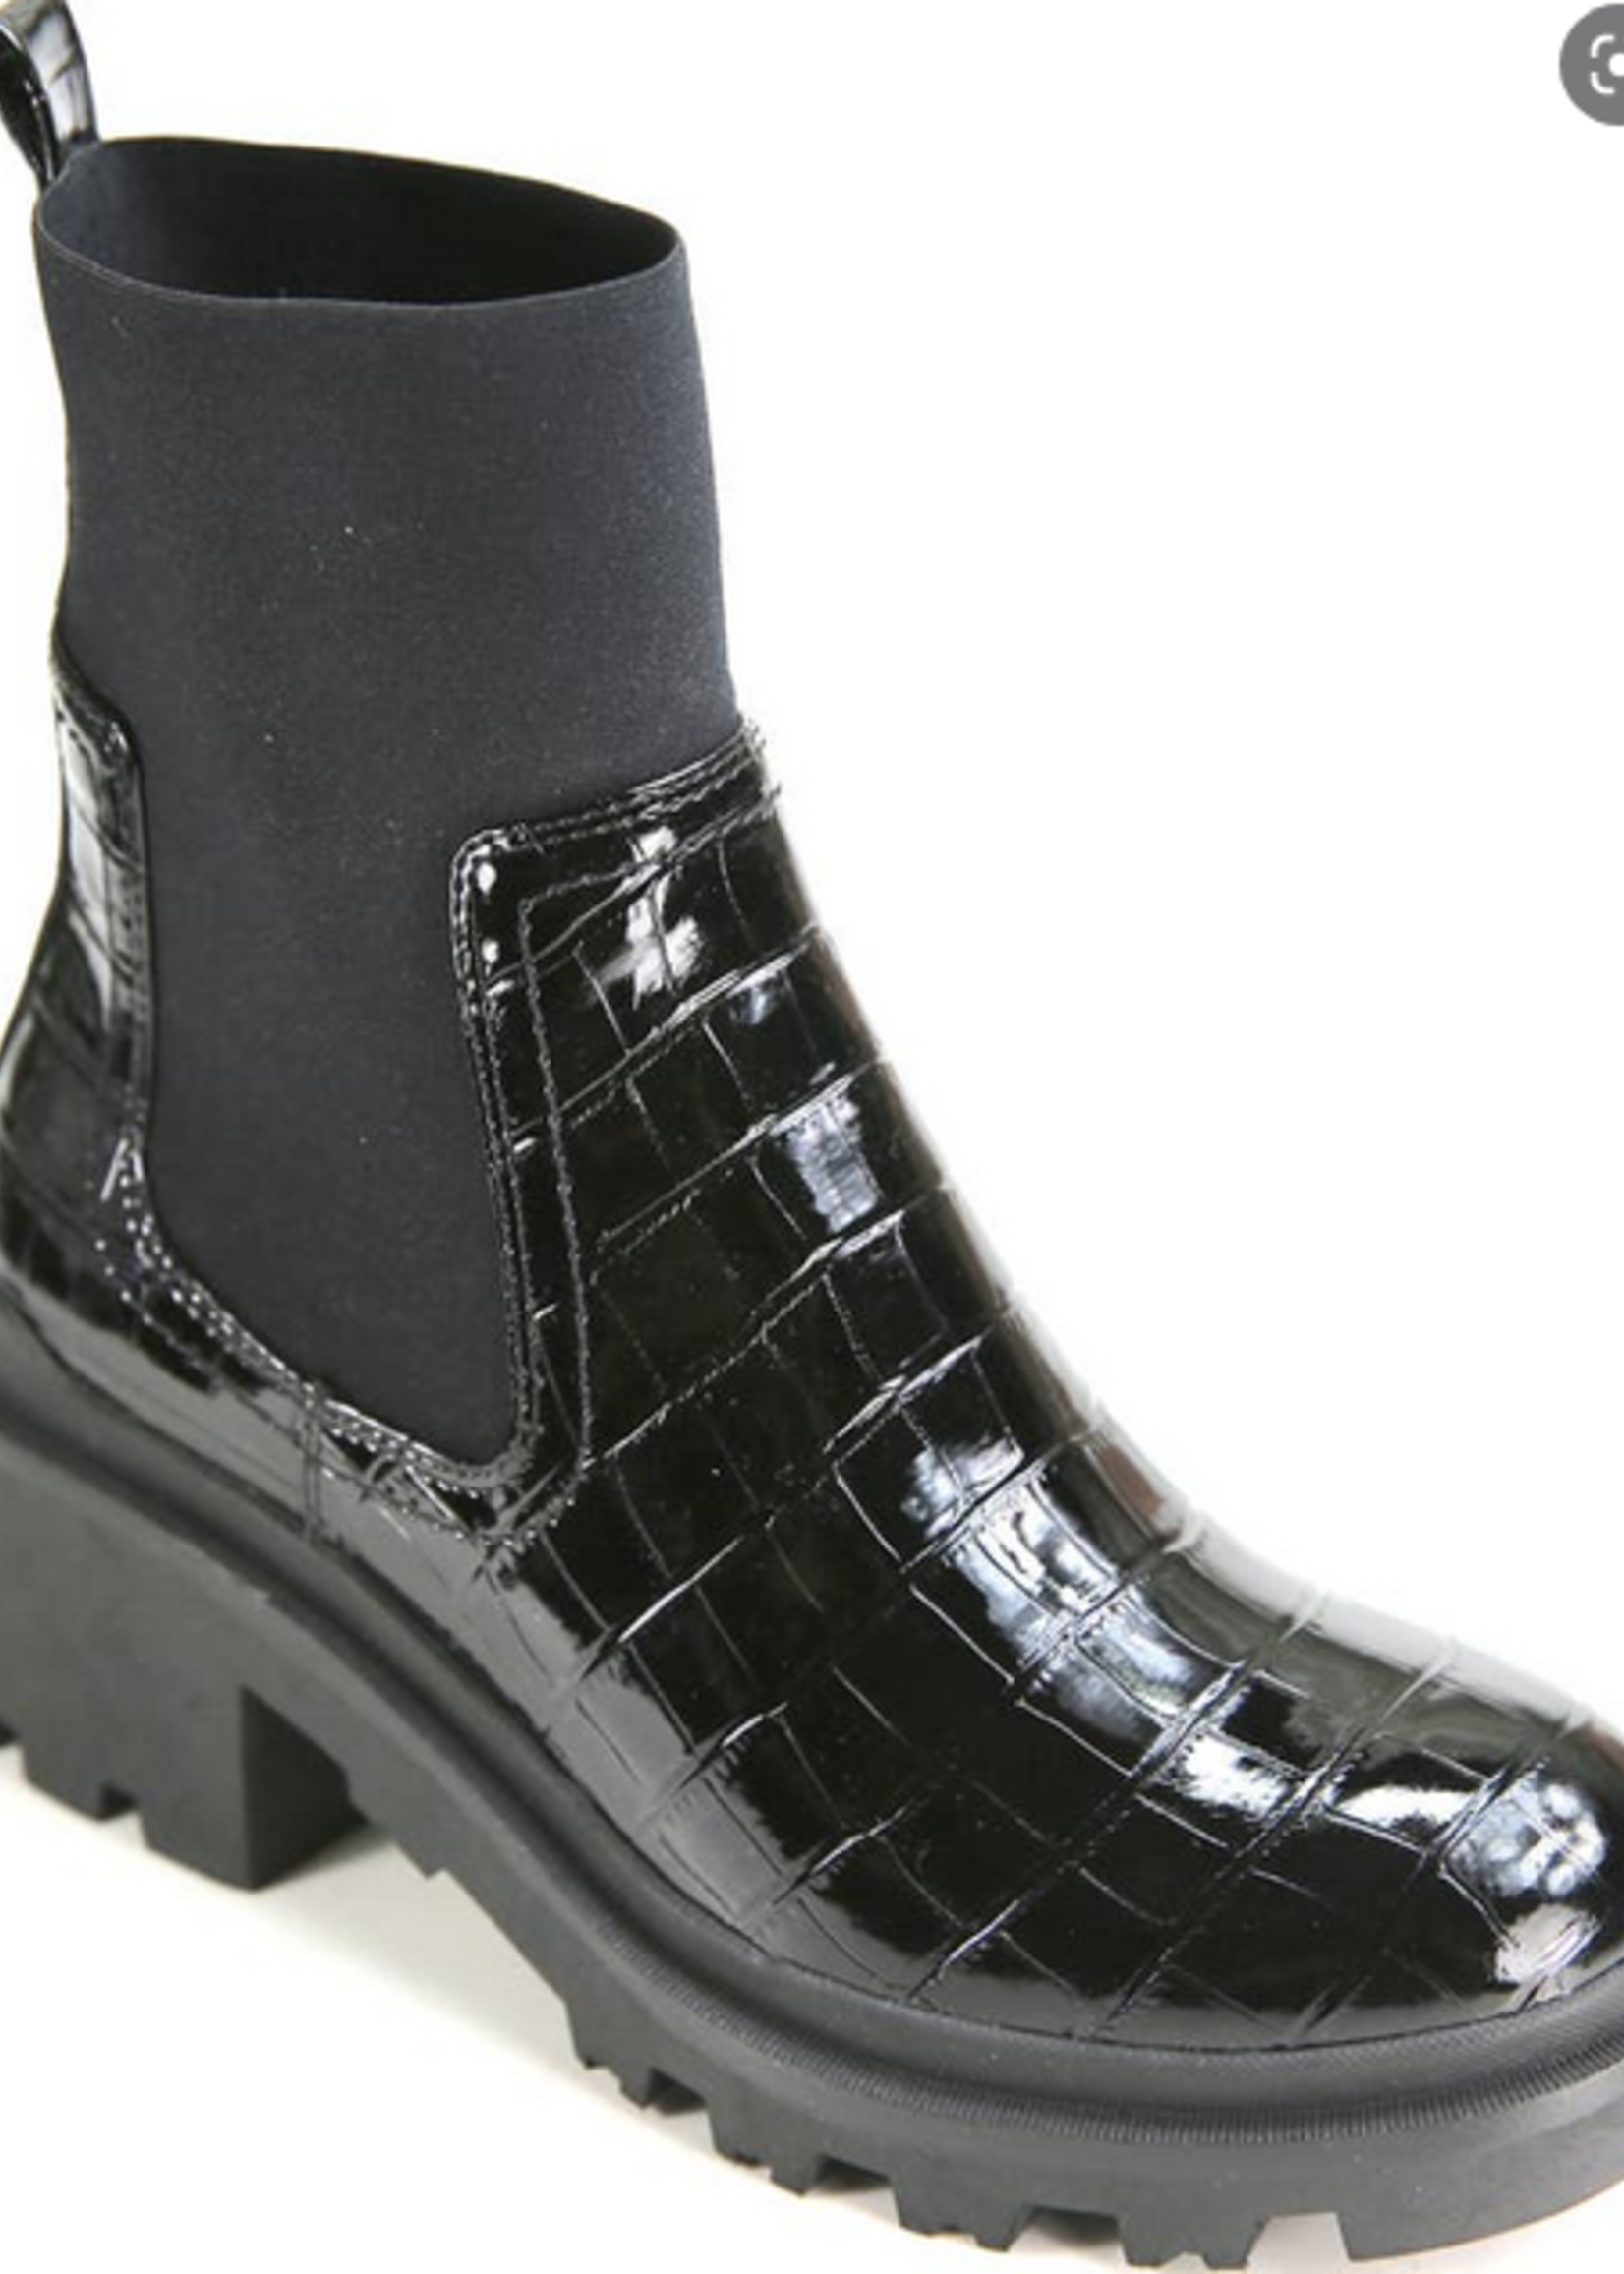 B.O.G. COLLECTIVE BAND OF GYPSIES MARION BLACK PATENT CROC